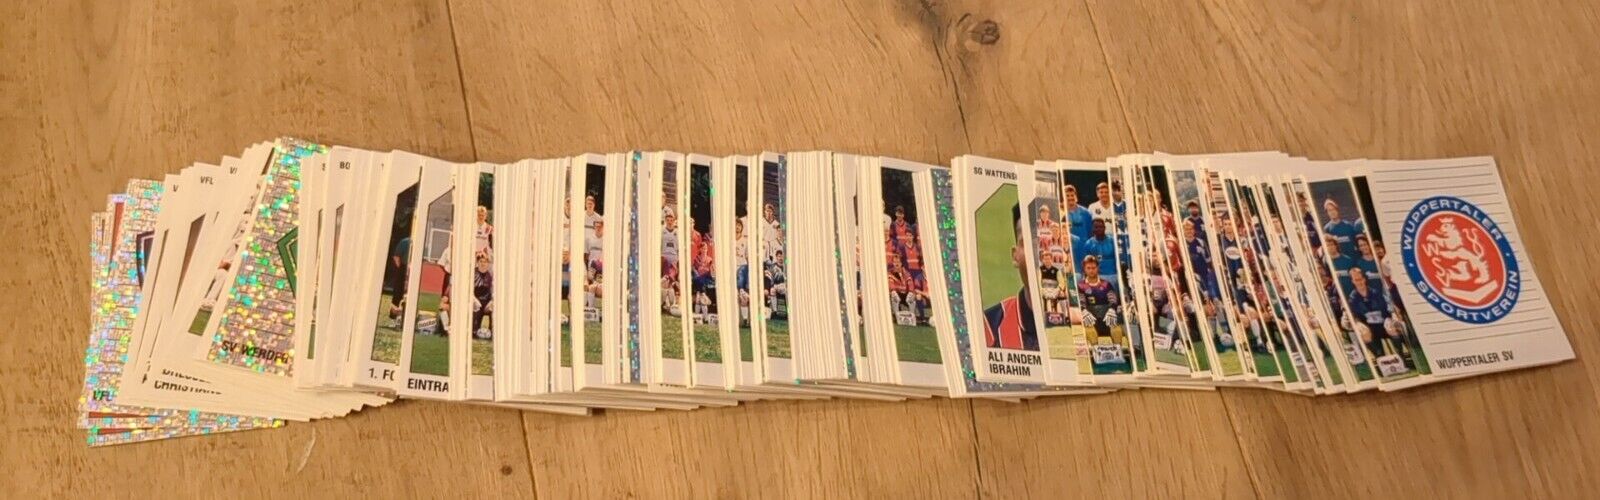 Panini football Bundesliga 1993 93 complete set unglued and excellent condition 